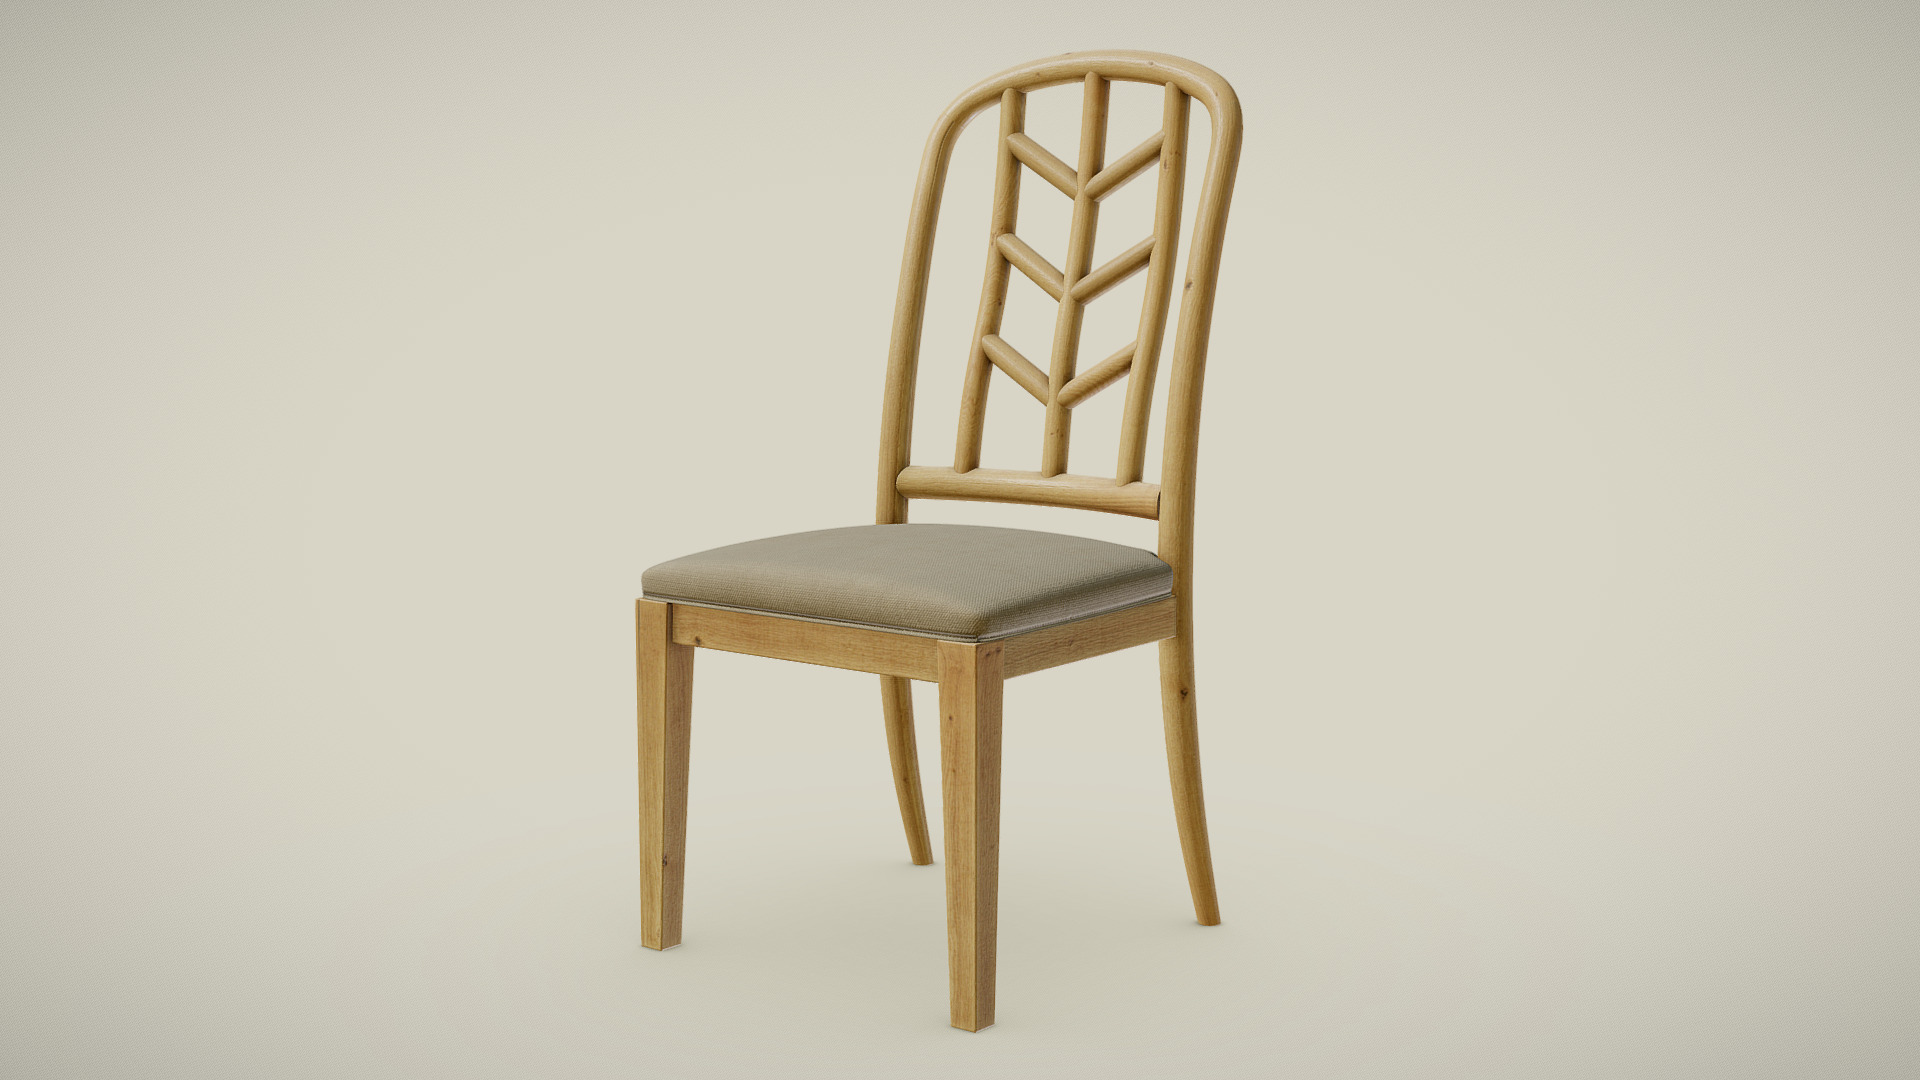 3D model Chev Chair - This is a 3D model of the Chev Chair. The 3D model is about a wooden chair with a cushion.